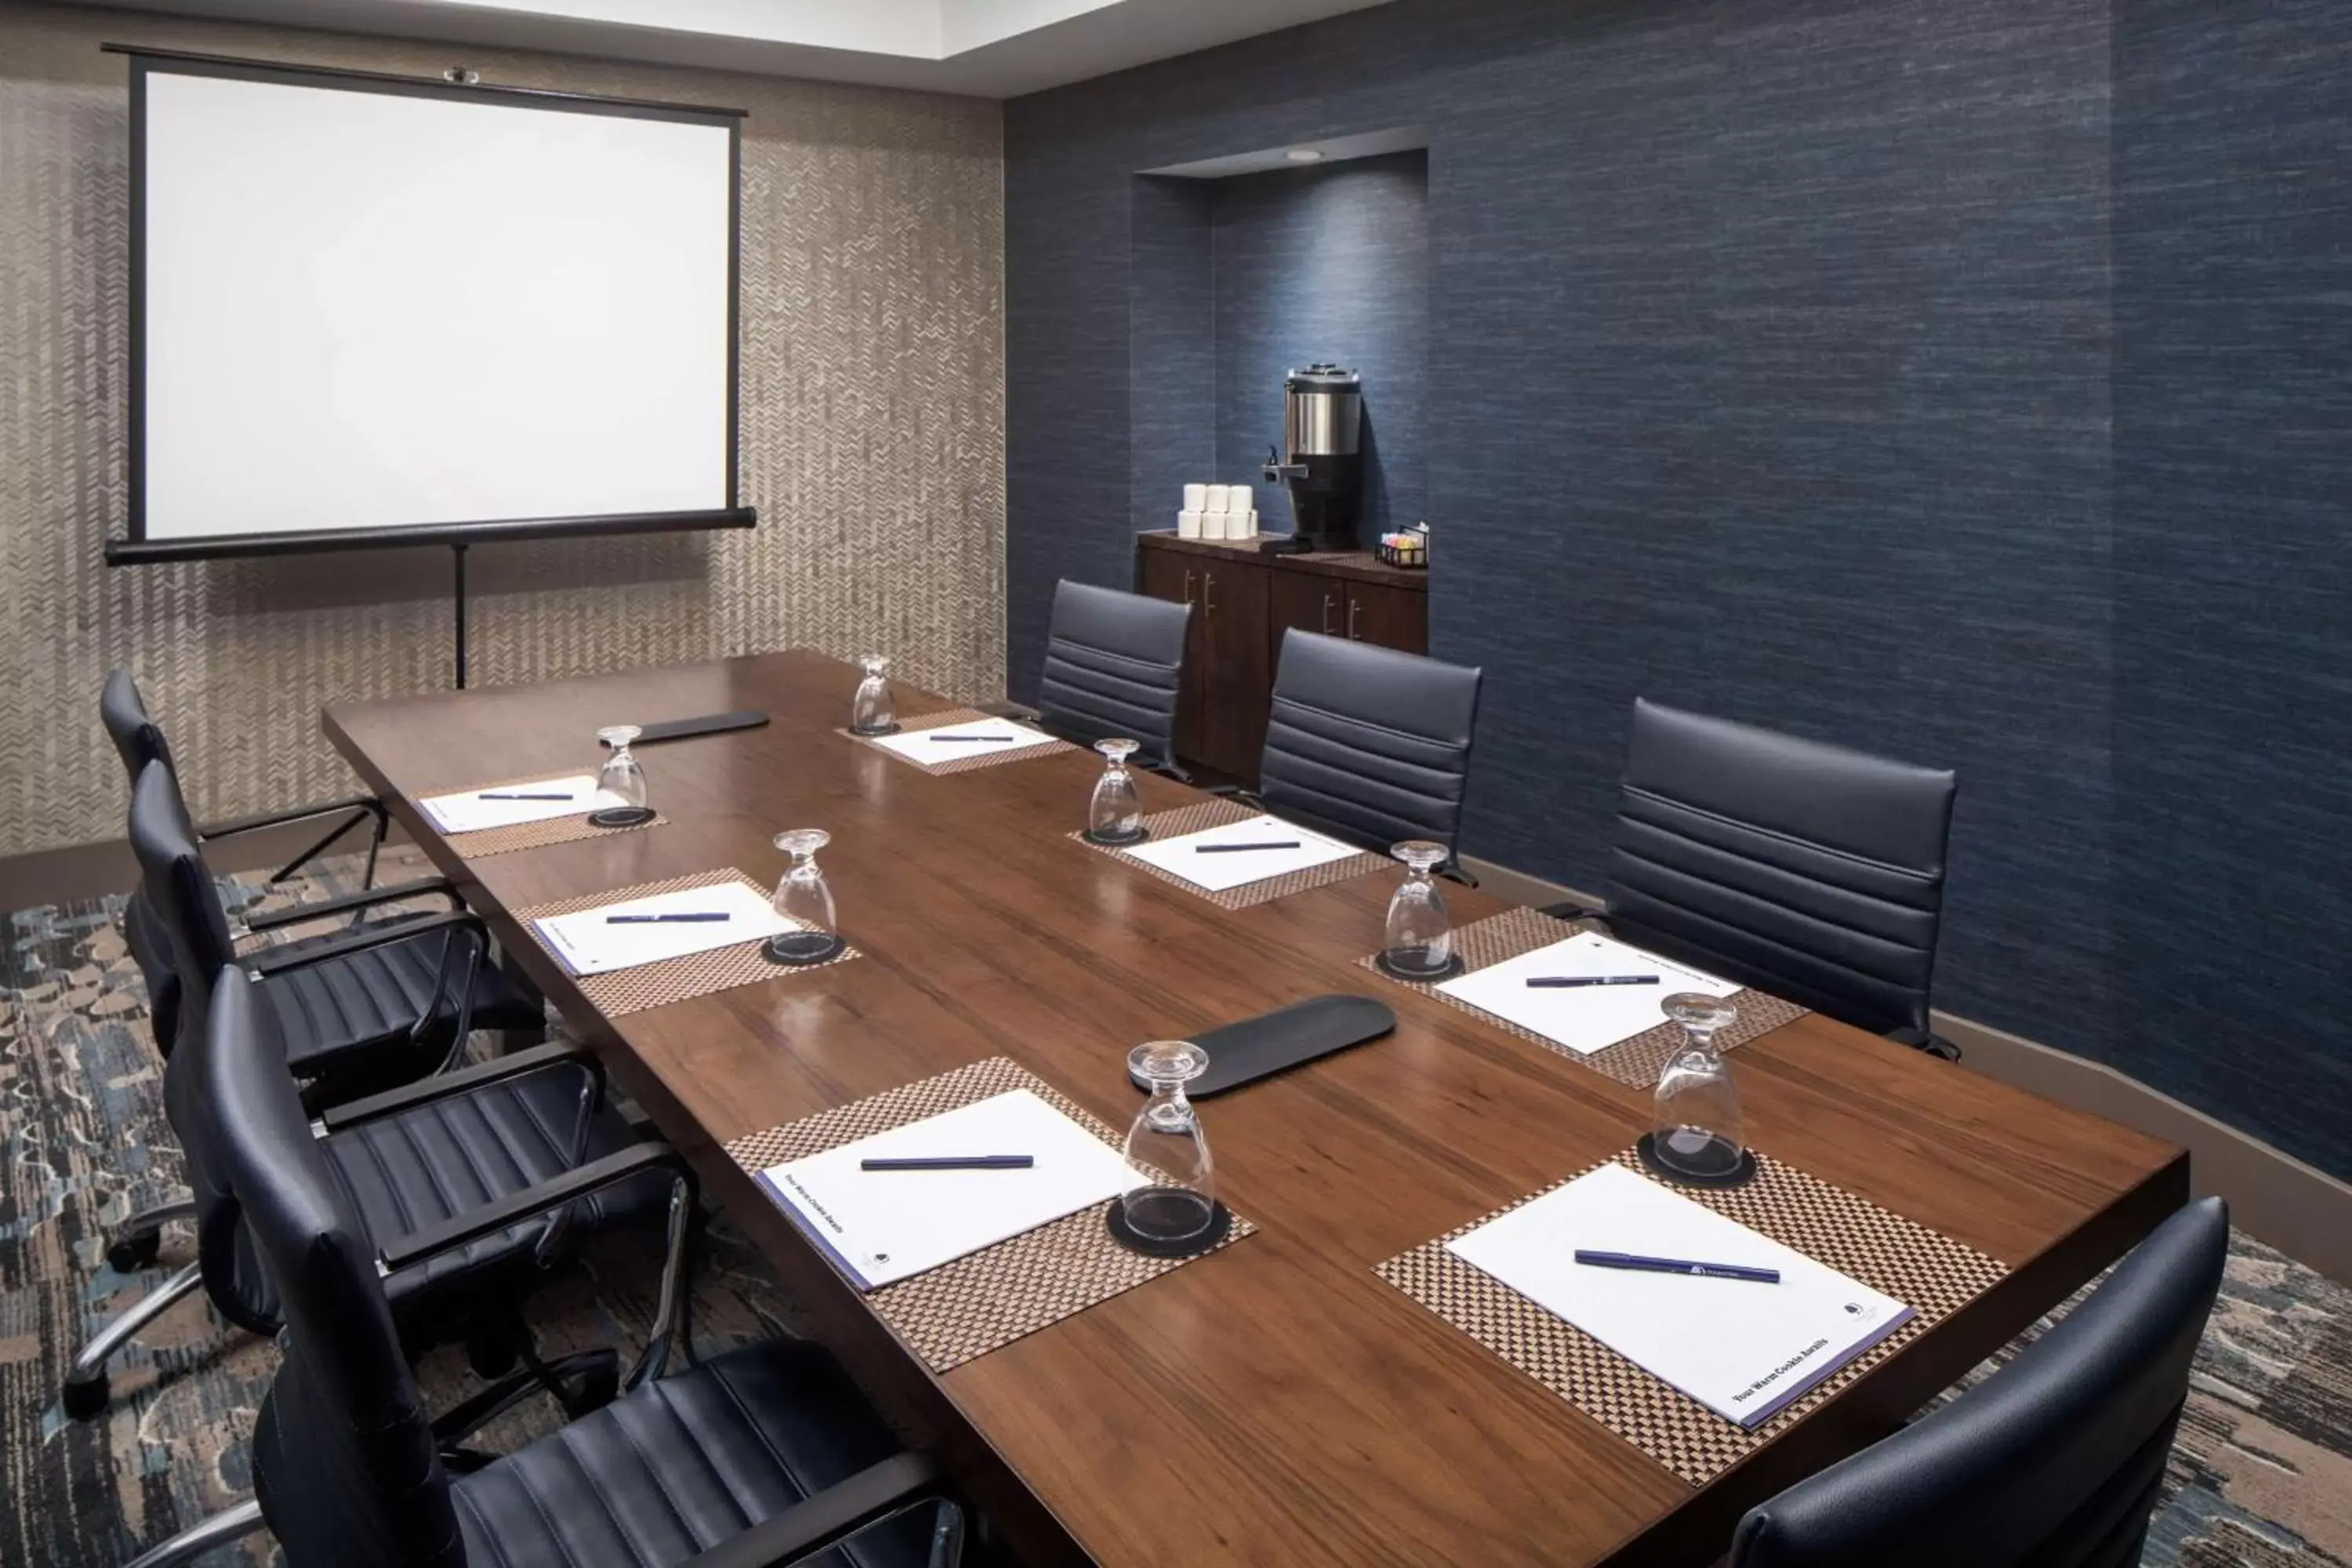 Meeting/conference room, Business Area/Conference Room in DoubleTree by Hilton Ann Arbor, MI